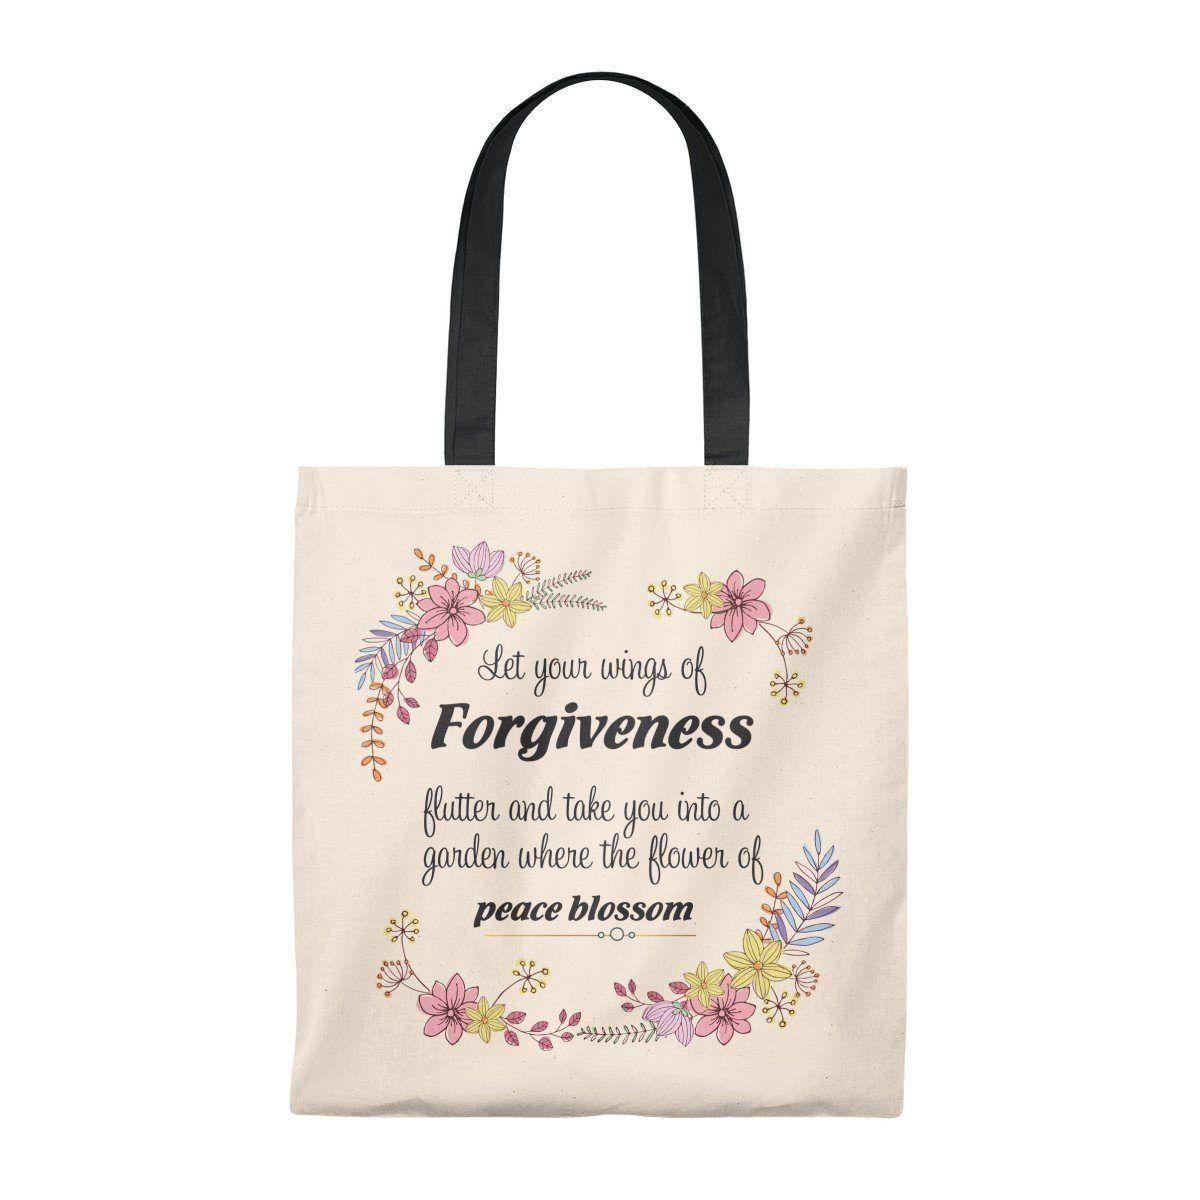 Let Your Wings Of Forgiveness Day Peace Blossom Printed Tote Bag